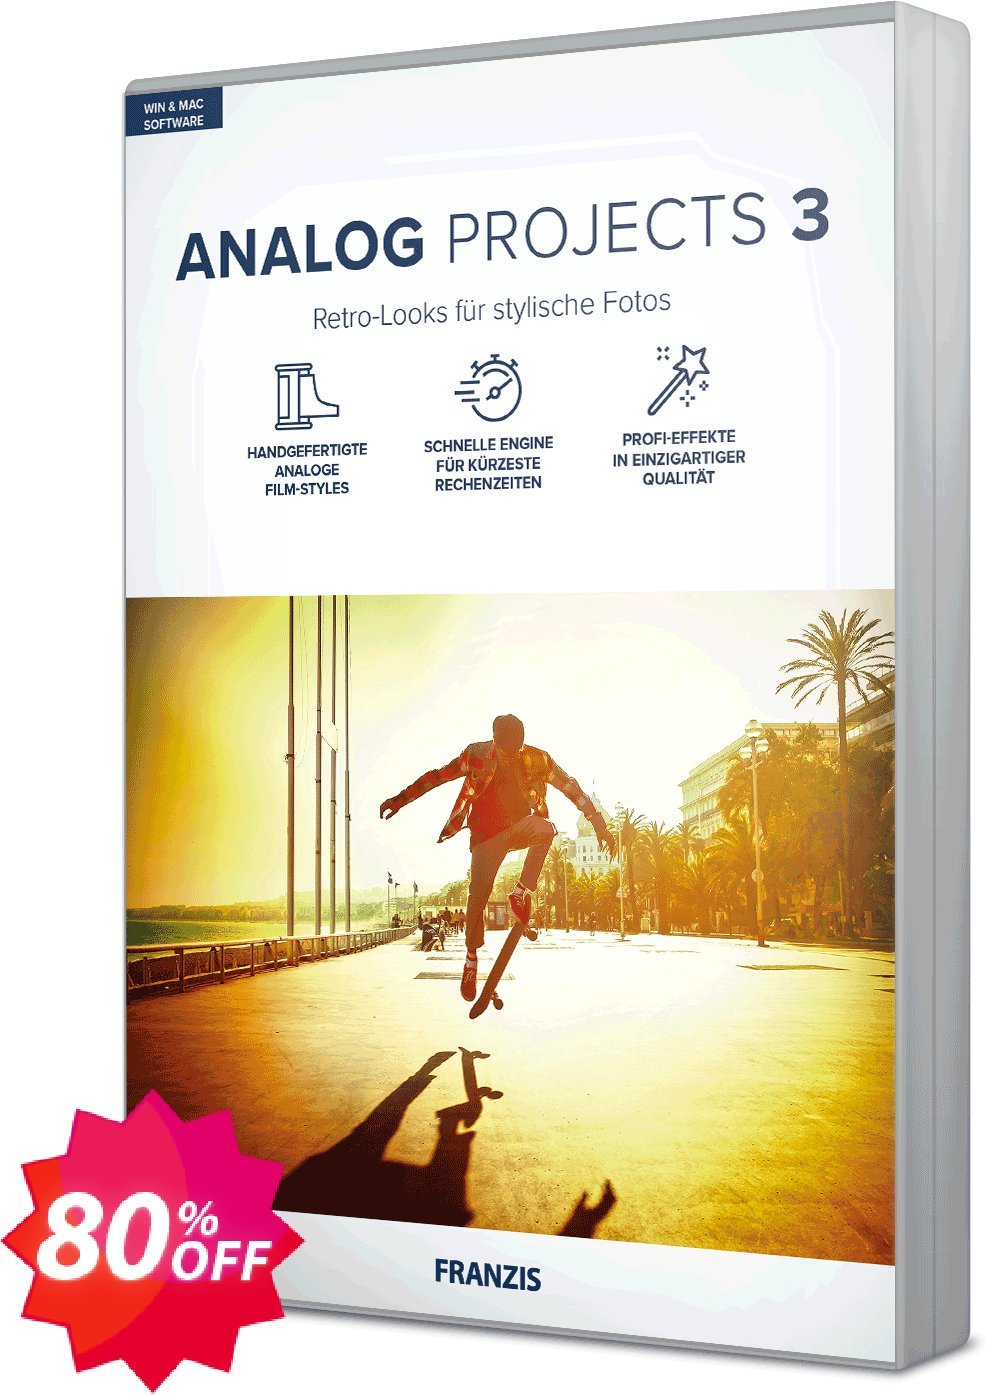 ANALOG projects 3 Pro Coupon code 80% discount 